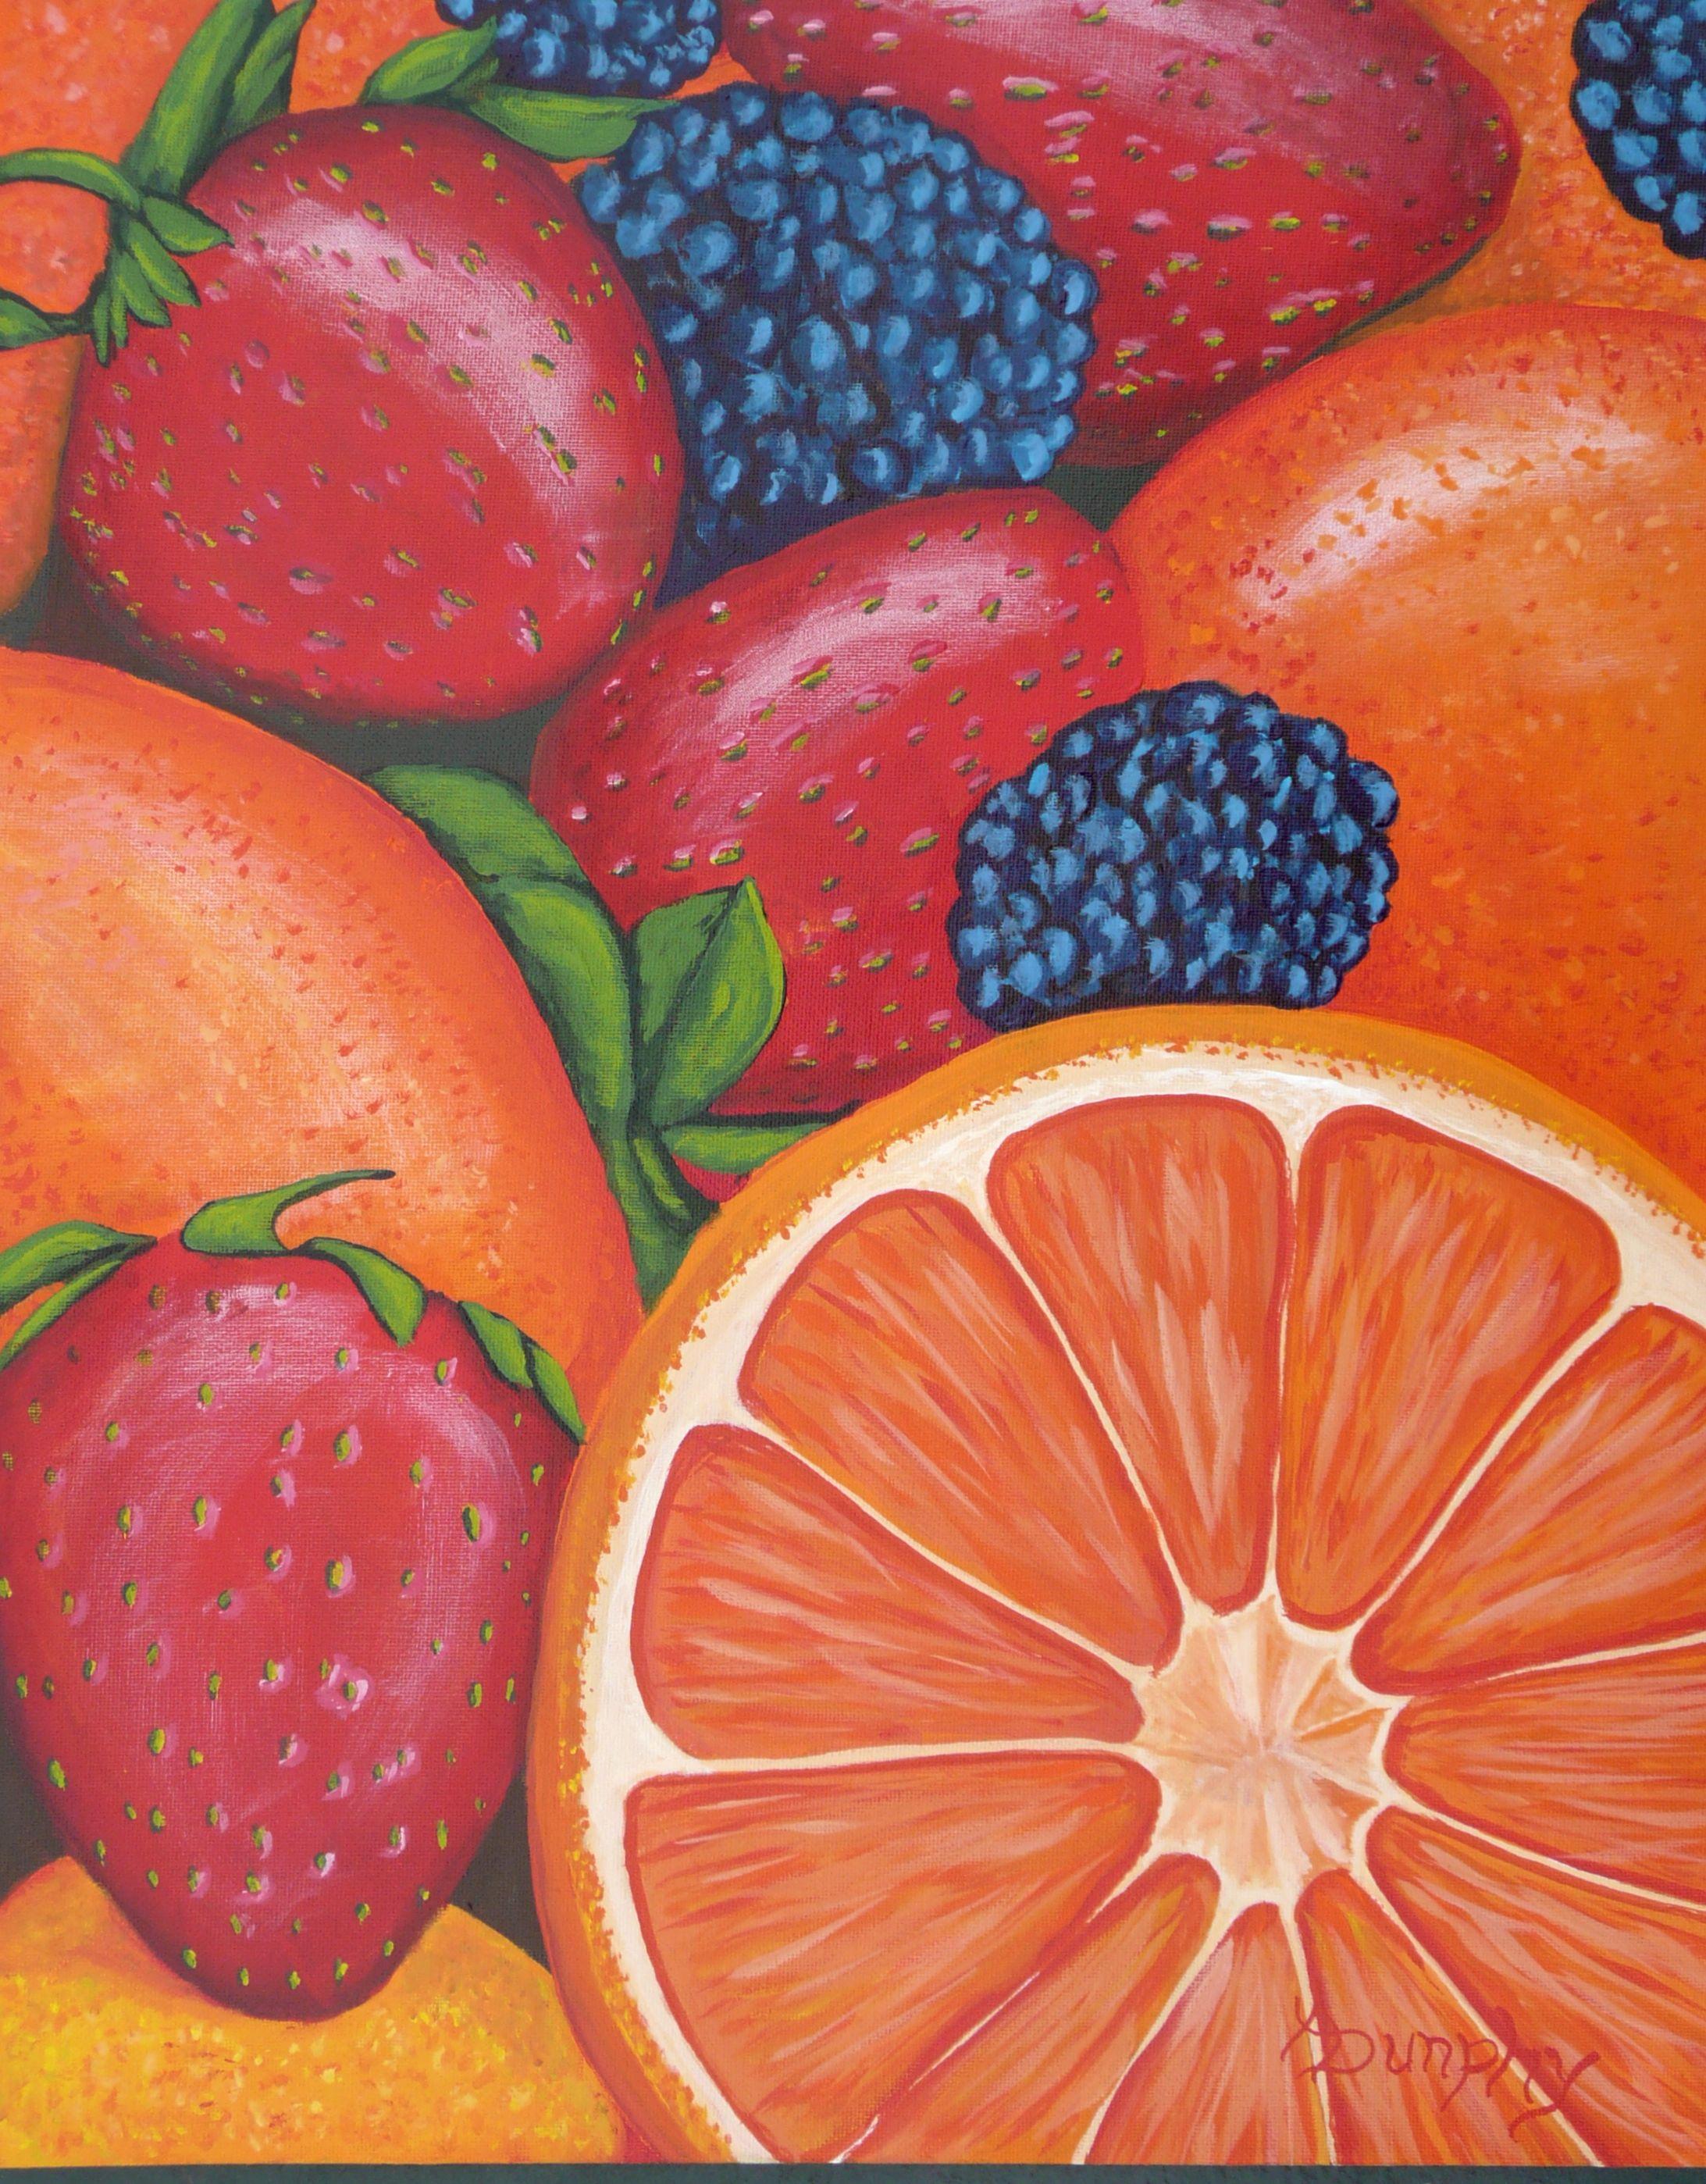 Juicy is my first painting of 2021. I was drawn to the vibrant colors of the various fruit and wanted to create them. The textures of the fruit were a wonderful challenge for me and I enjoyed the process. I will try more fruit this year.    This